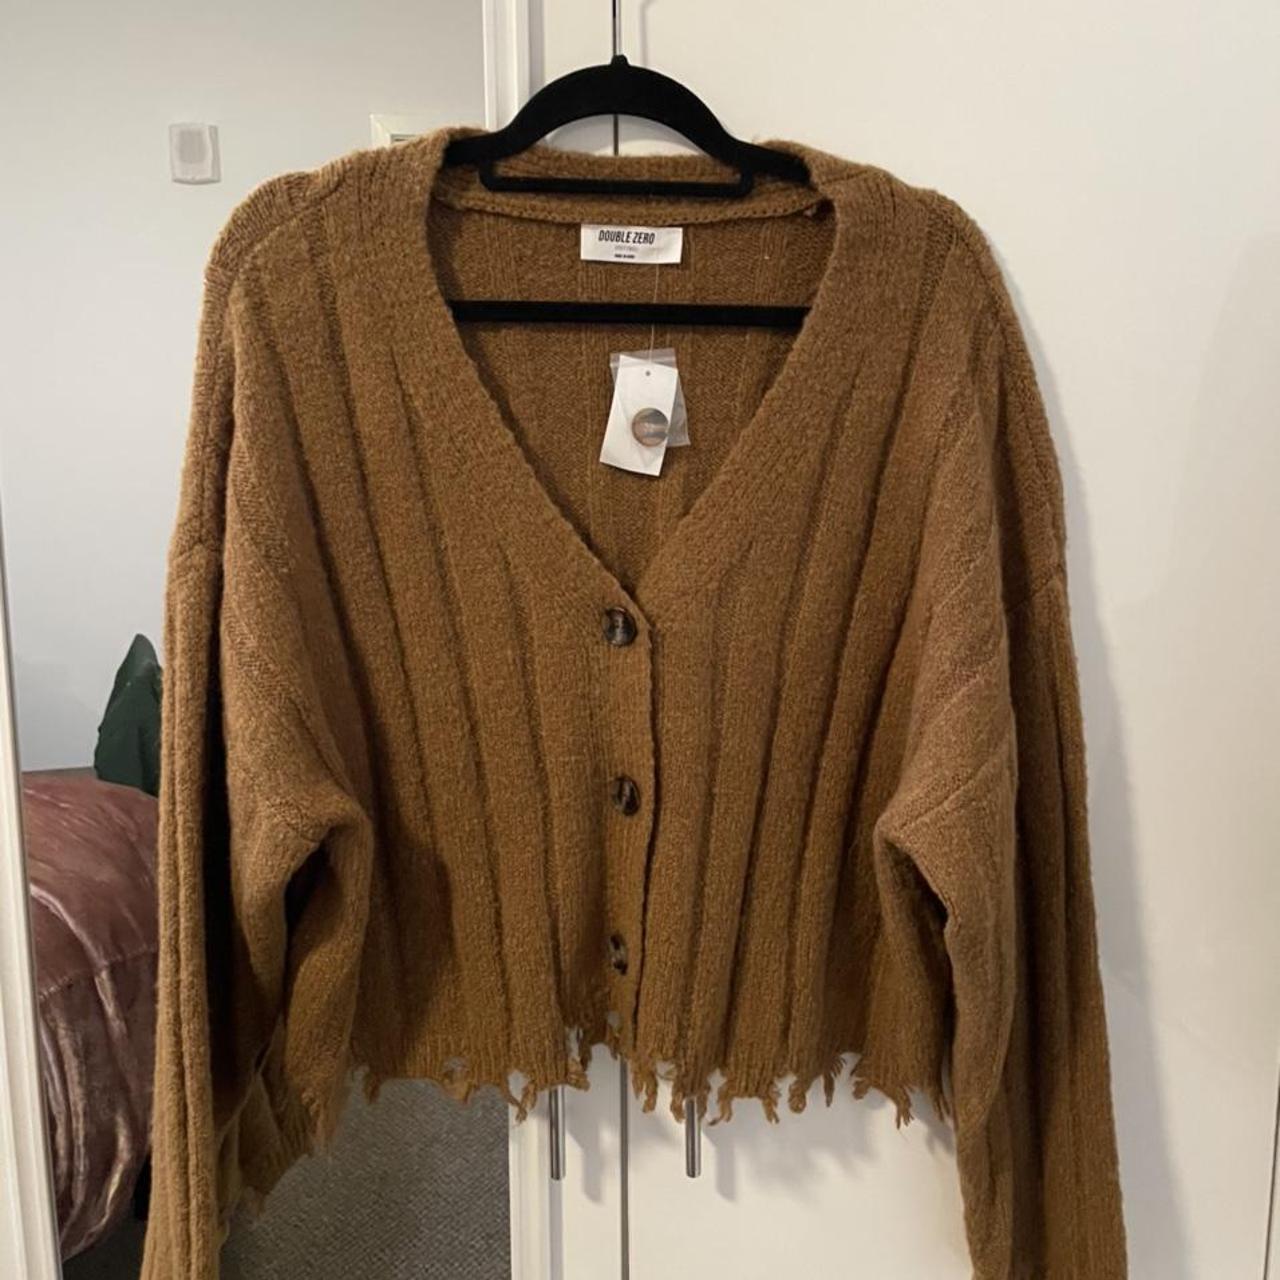 Brand new cardigan from Double Zero * Never been